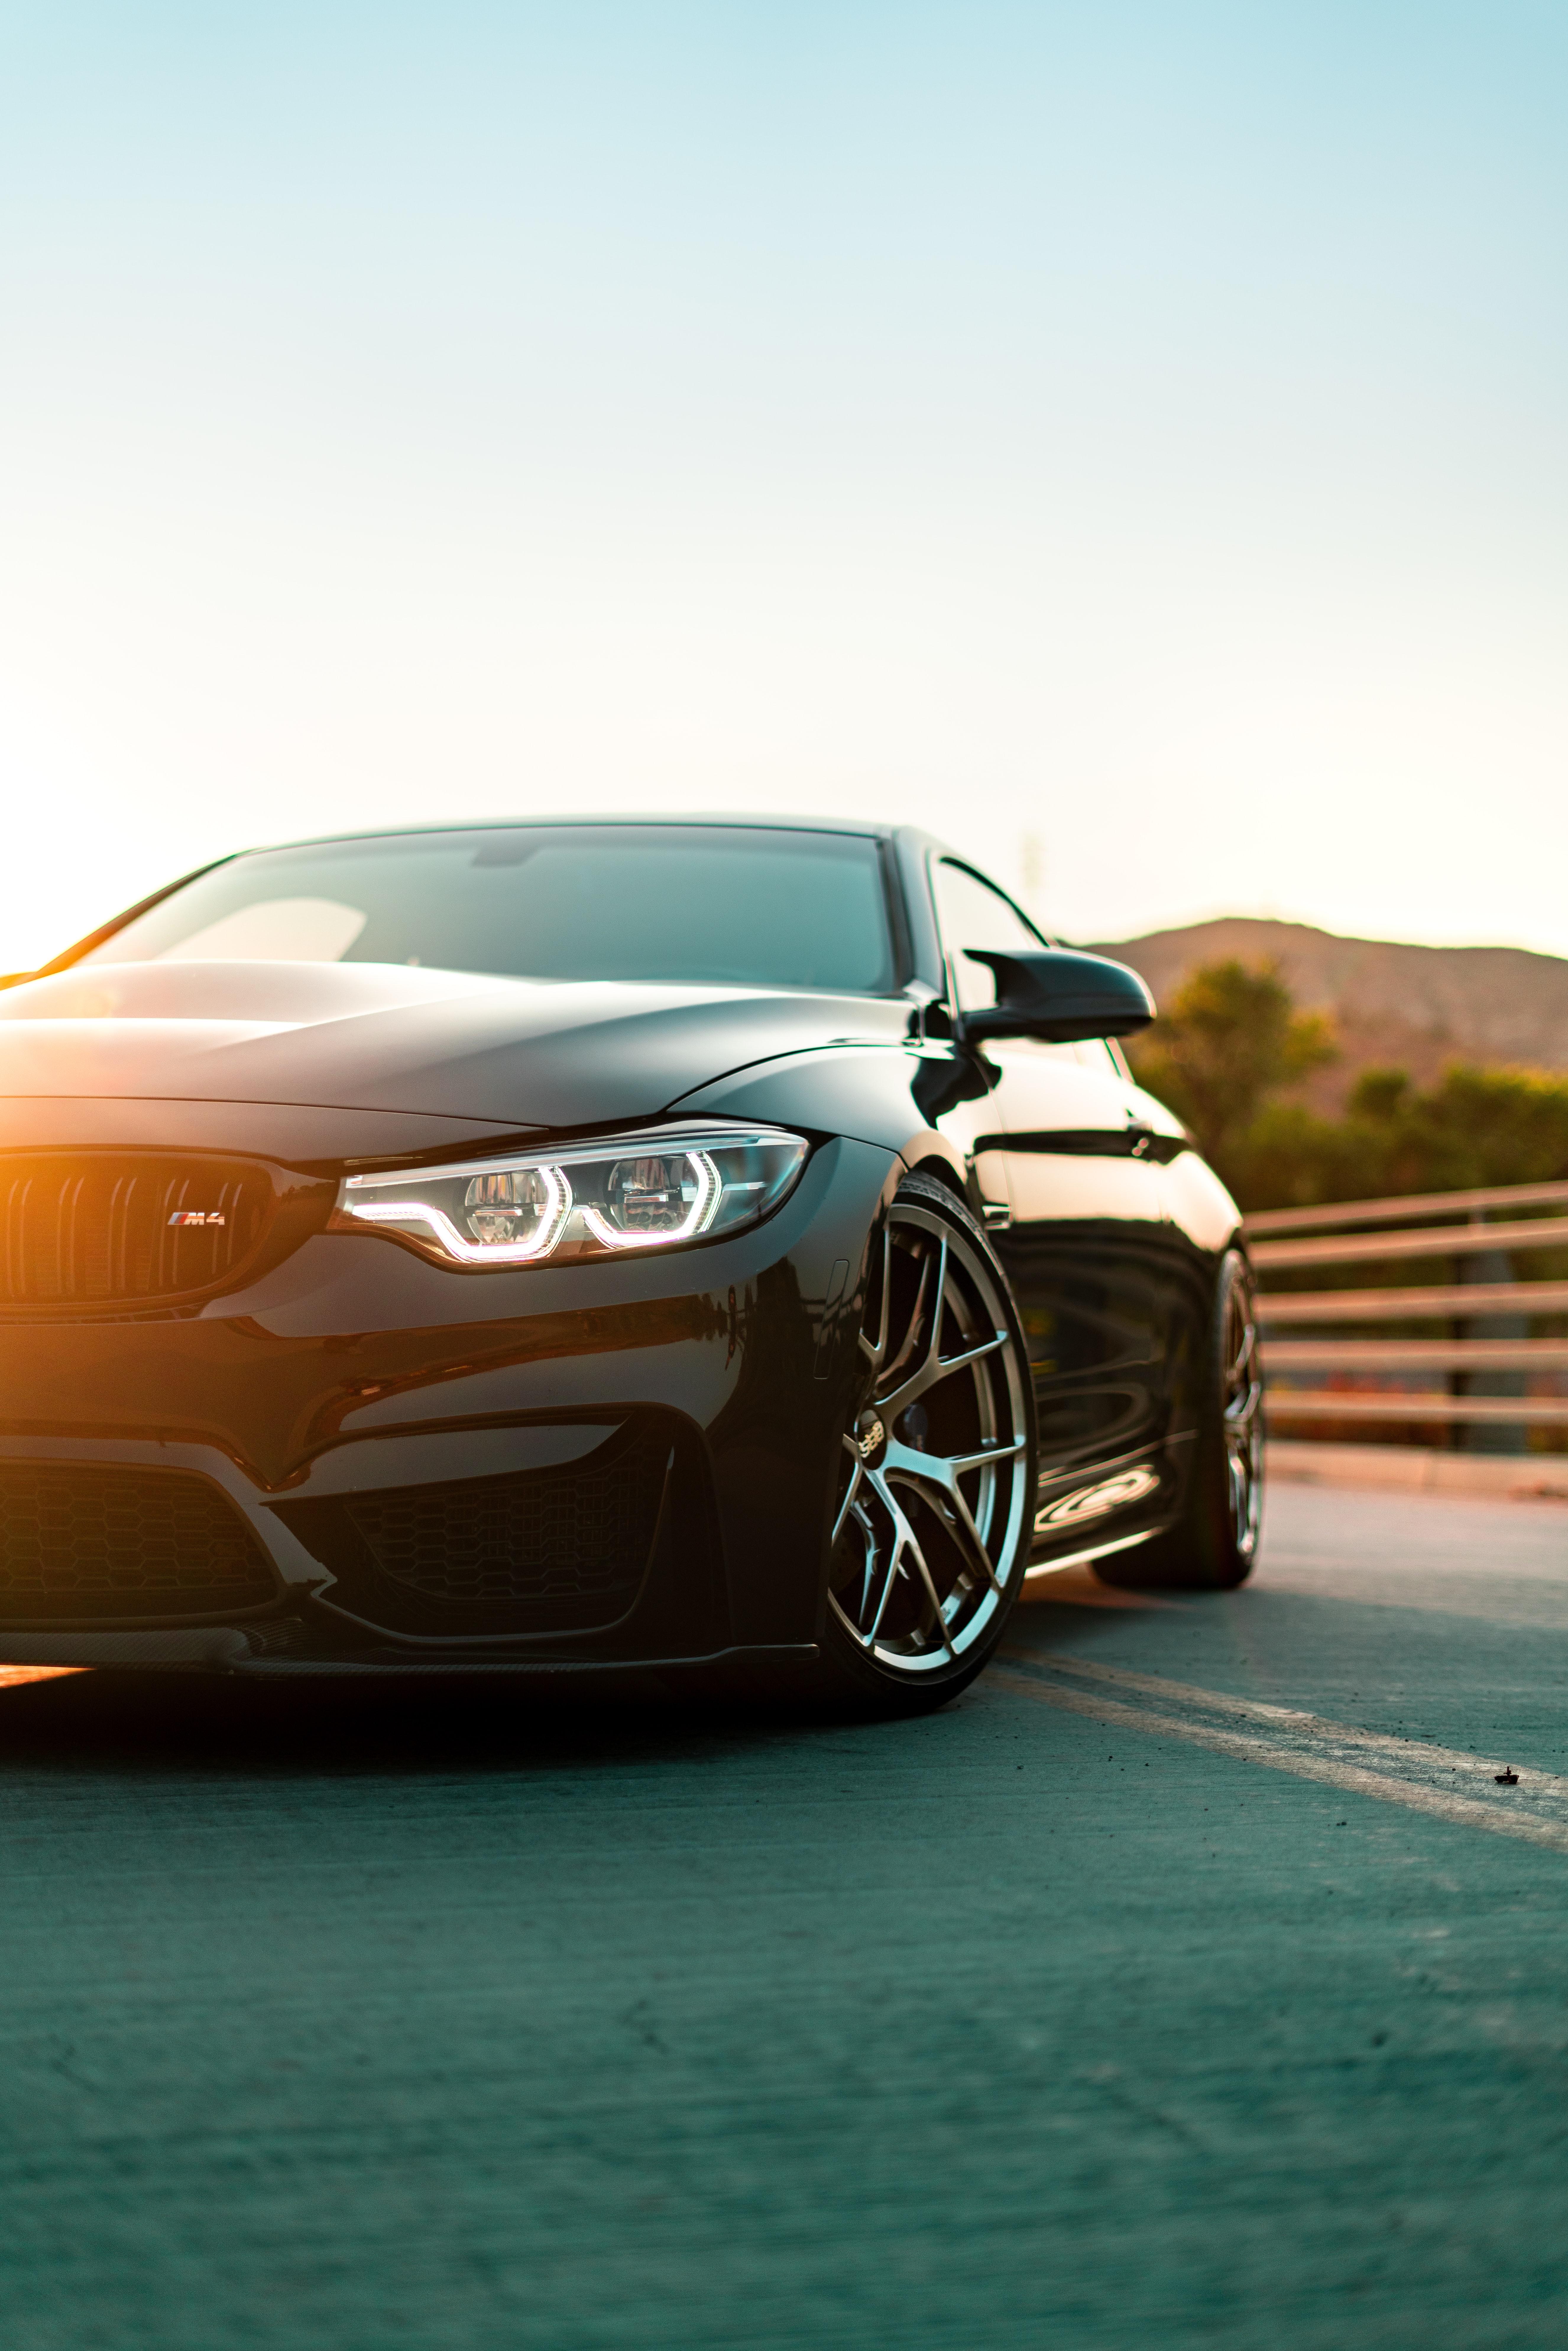 android bmw, cars, black, car, front view, headlight, bmw m4